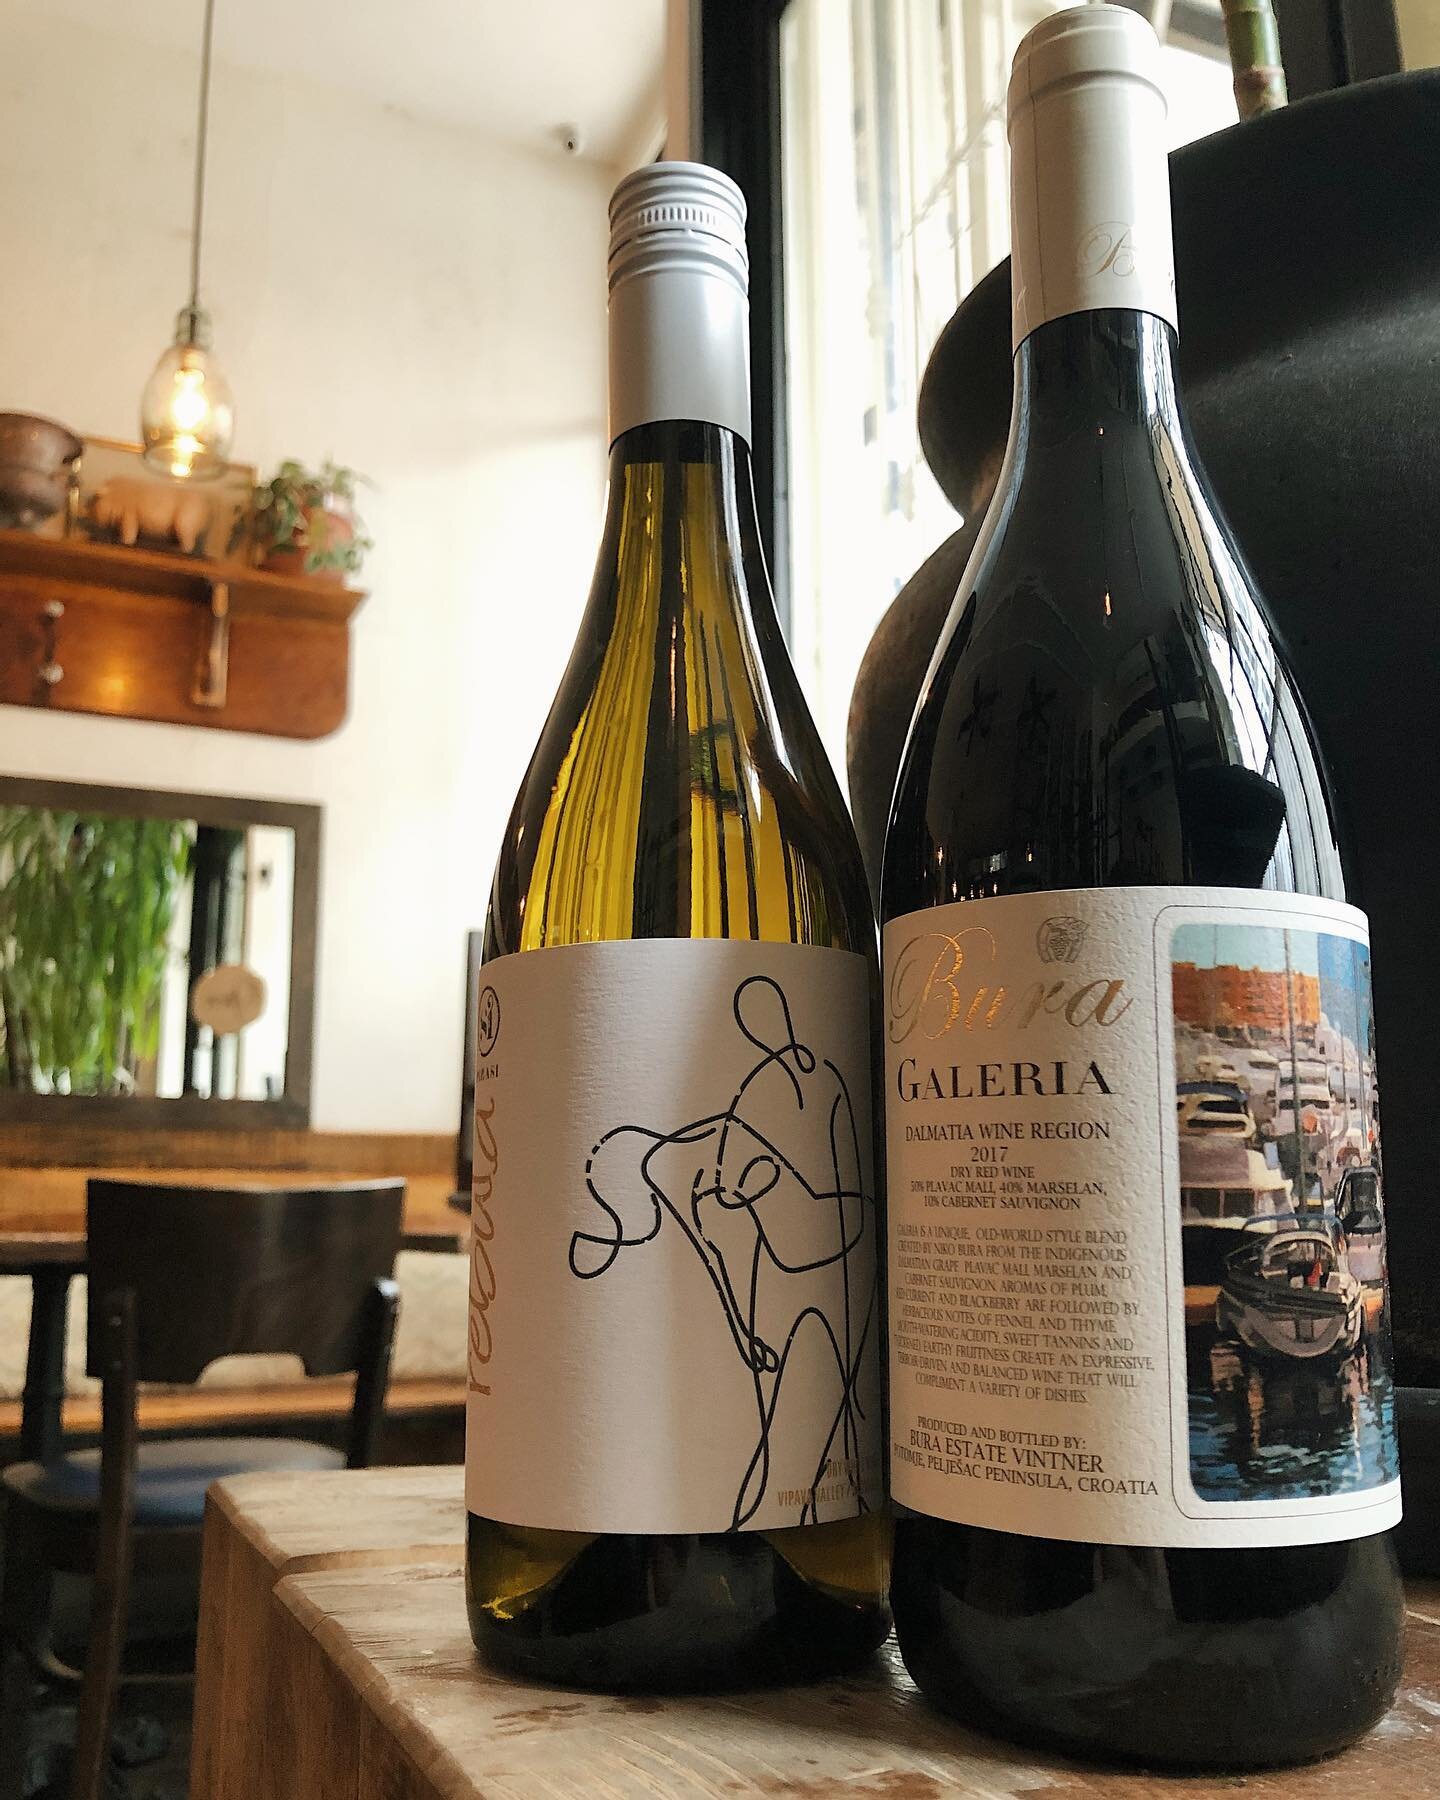 New delicious and fun spring wines from Slovenia are finally here! ⠀
Click &ldquo;Order Food&rdquo; and get them delivered to your doorstep☝🏻 ⠀ ⠀

#quarantinebooze #deliciouswine#slovenianwine #winedeliveredtoyourdoor #supportsmallbusiness#brooklynr